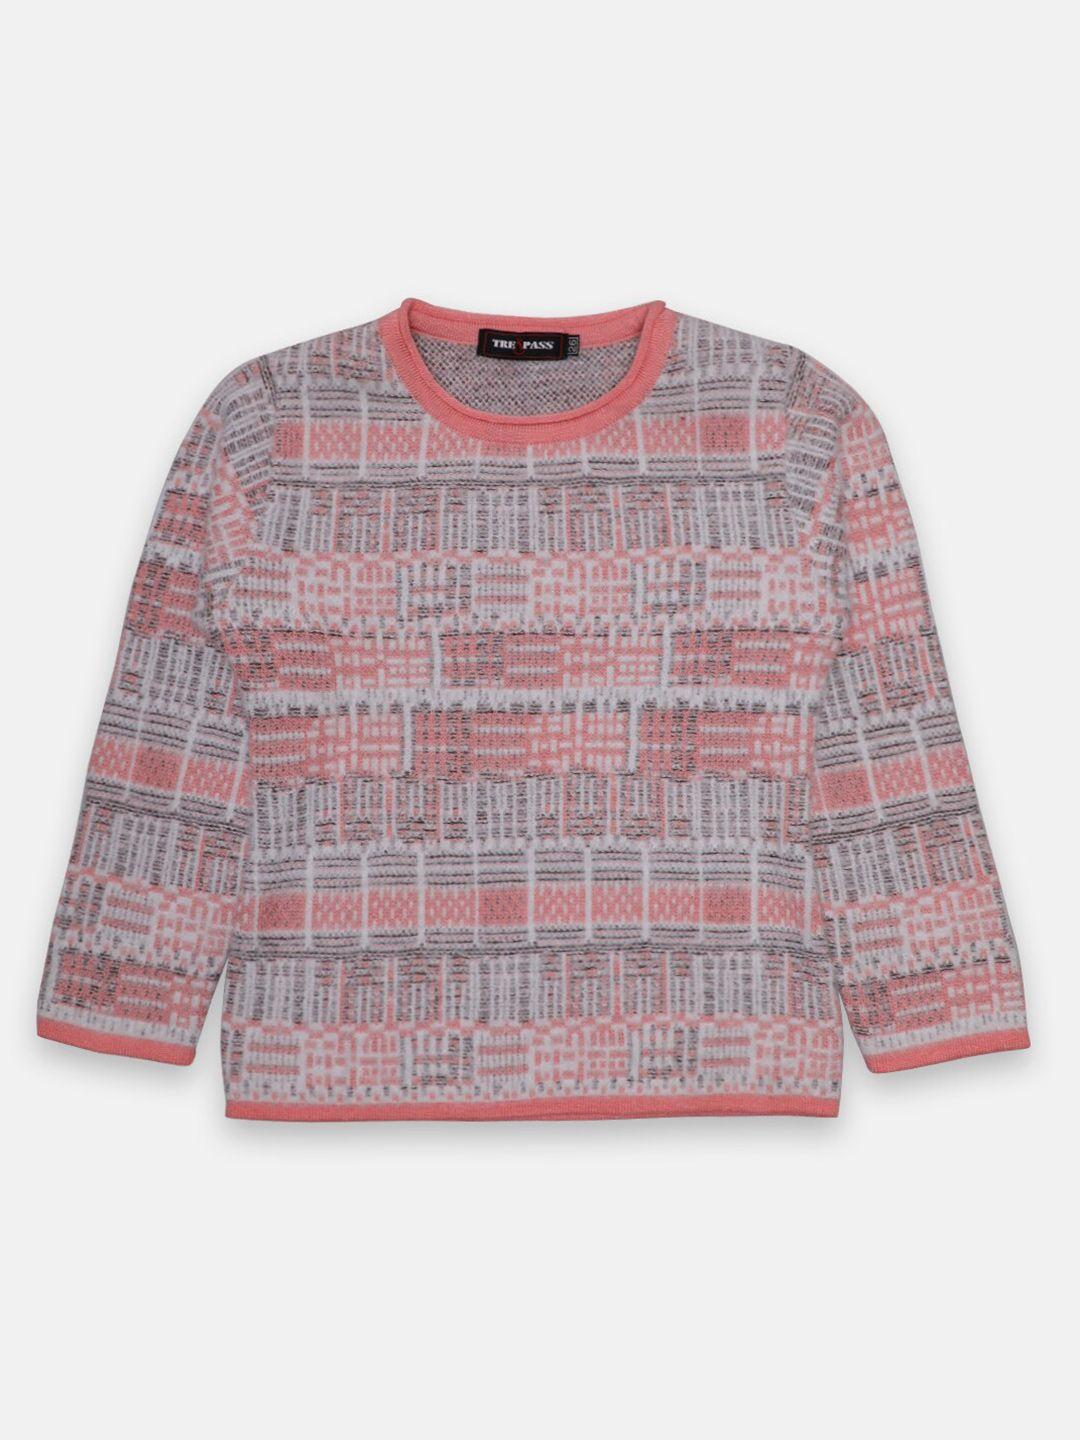 tre&pass-boys-peach-coloured-&-white-printed-woolen-pullover